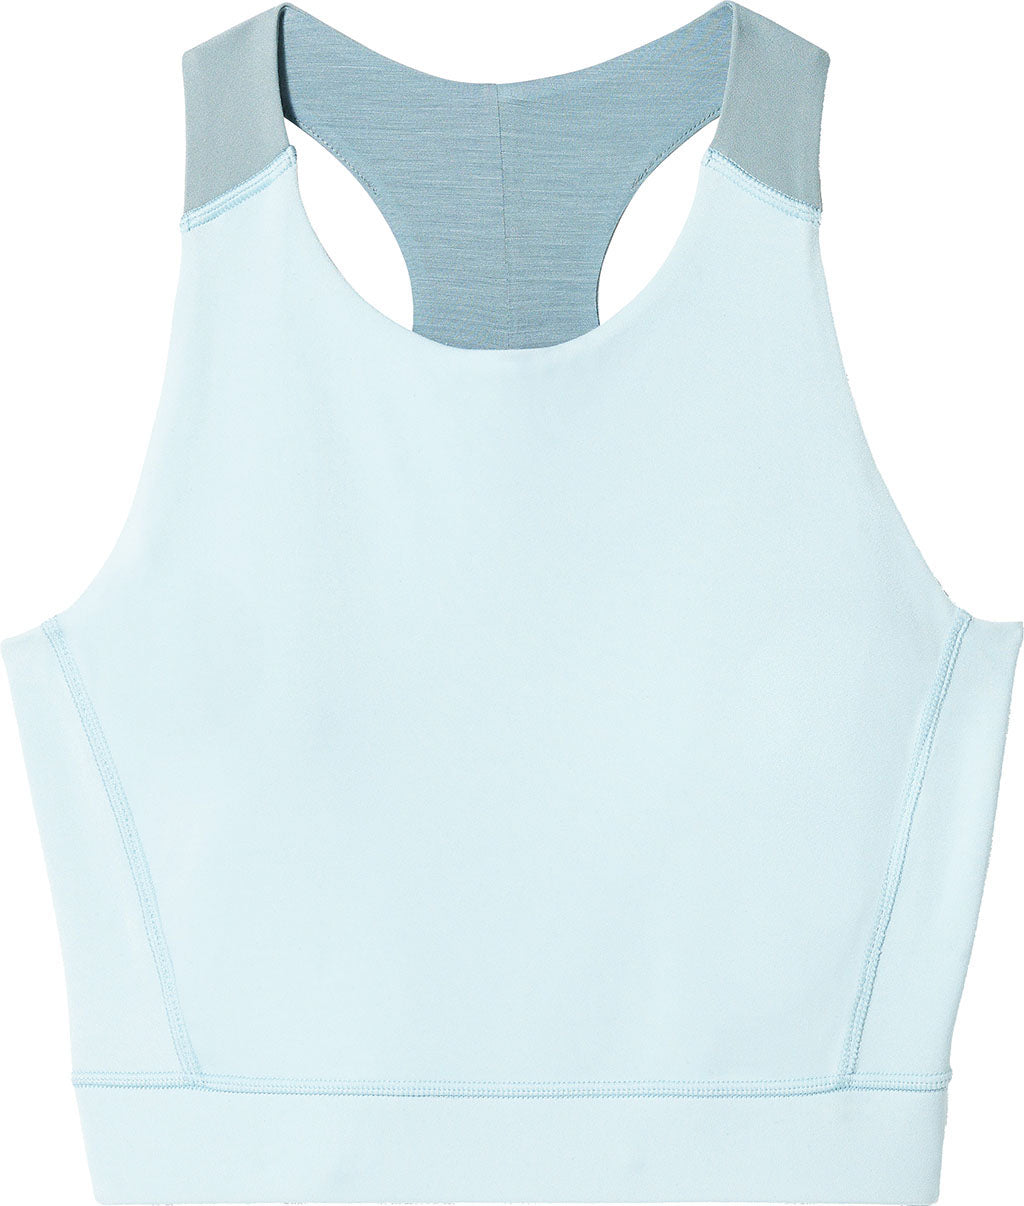 Women Yoga Tank Tops with Built in Bra Crop Sports Vests for Workout  Running XL 